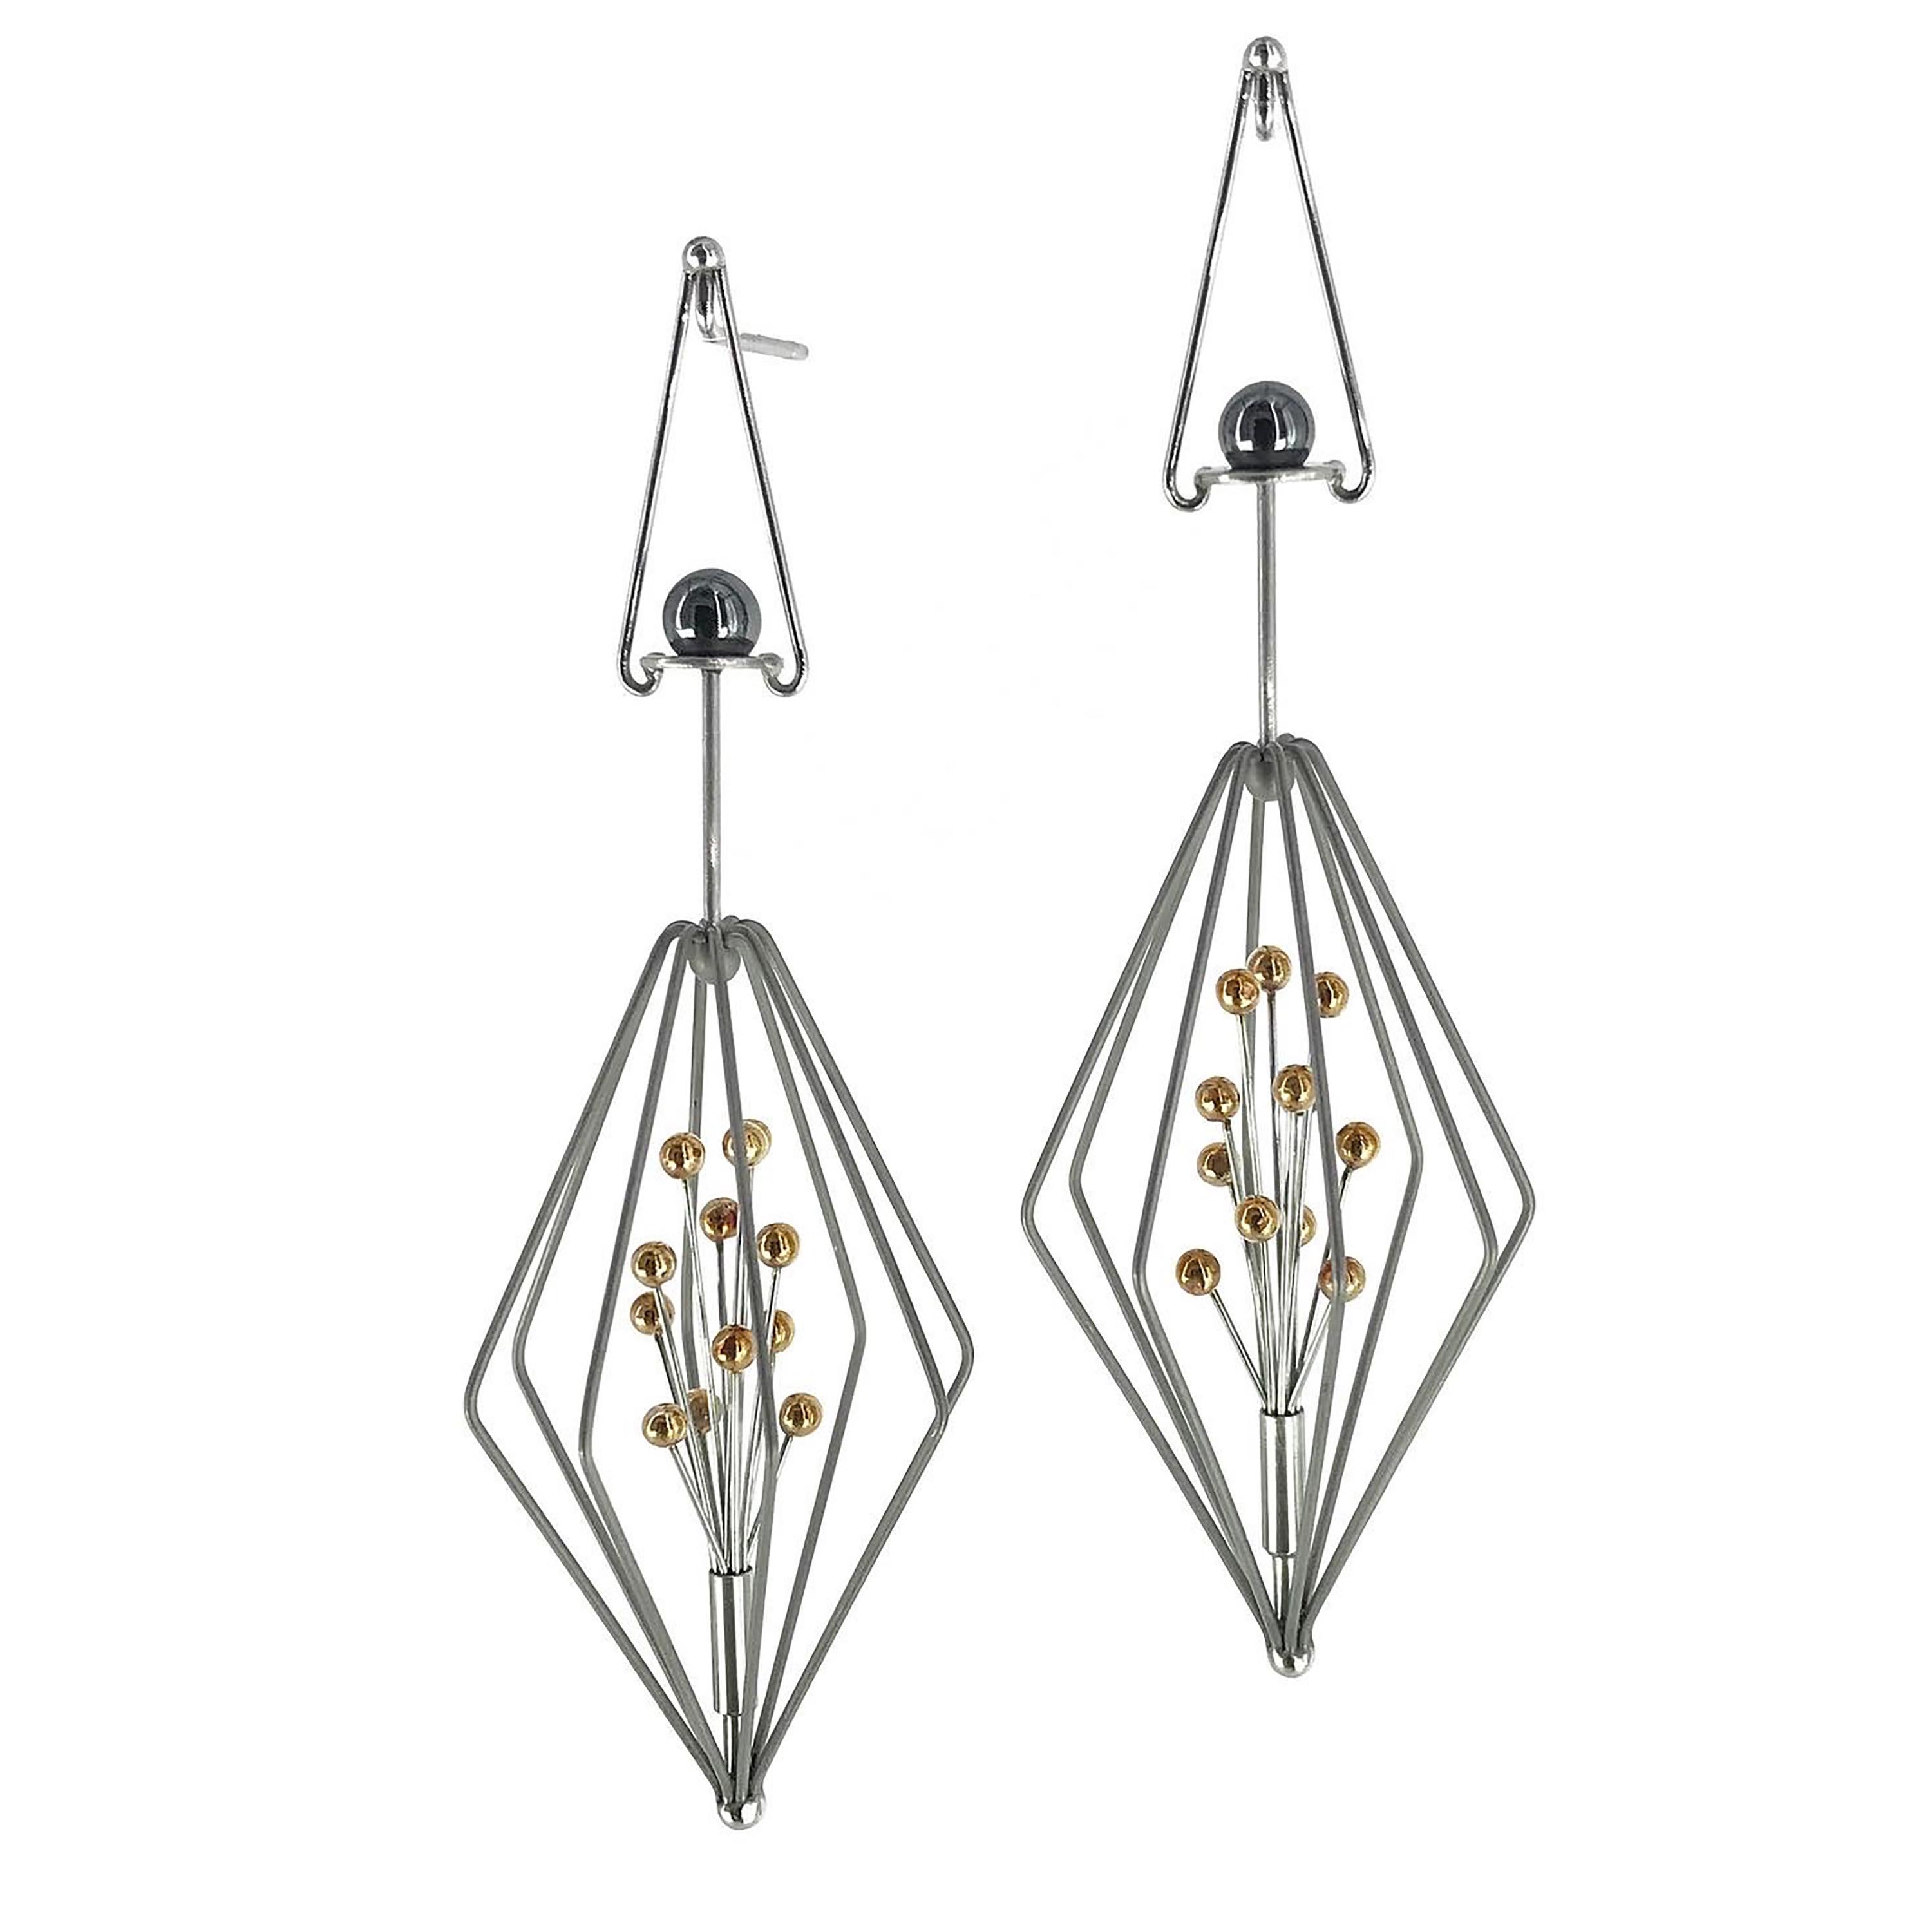 Julie Lake Abstract Sculpture - "Specimina Earrings " a contemporary, fine gauge stainless steel earrings